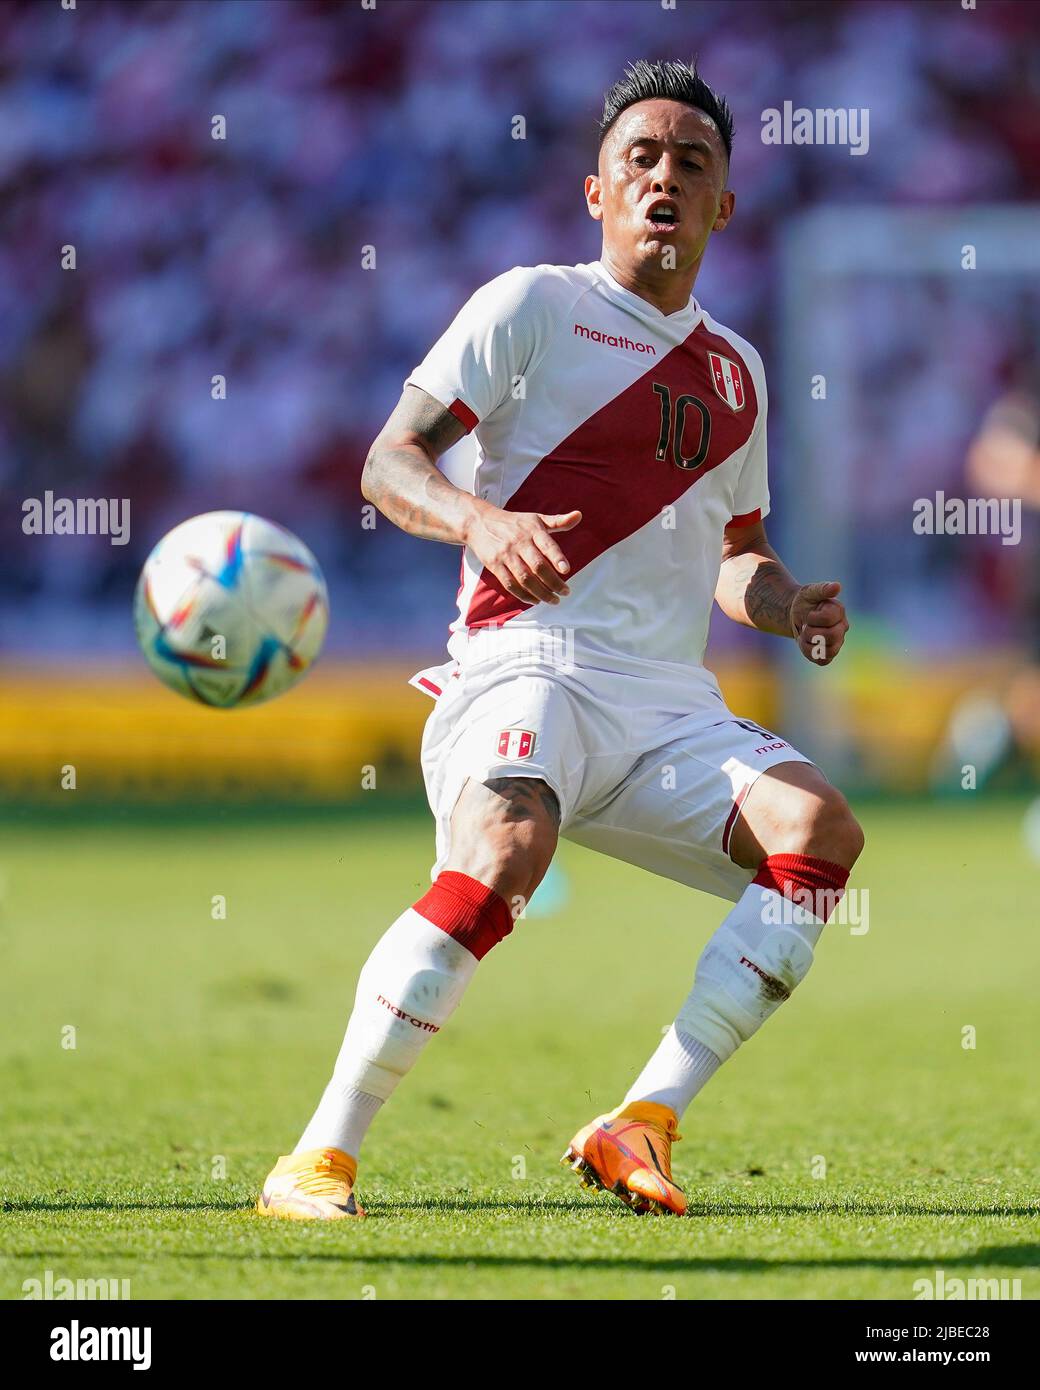 Barcelona, Spain. June 5, 2022, Christian Cueva of Peru during the friendly match between Peru and New Zealand played at RCDE Stadium on June 5, 2022 in Barcelona, Spain. (Photo by Bagu Blanco / PRESSINPHOTO) Stock Photo